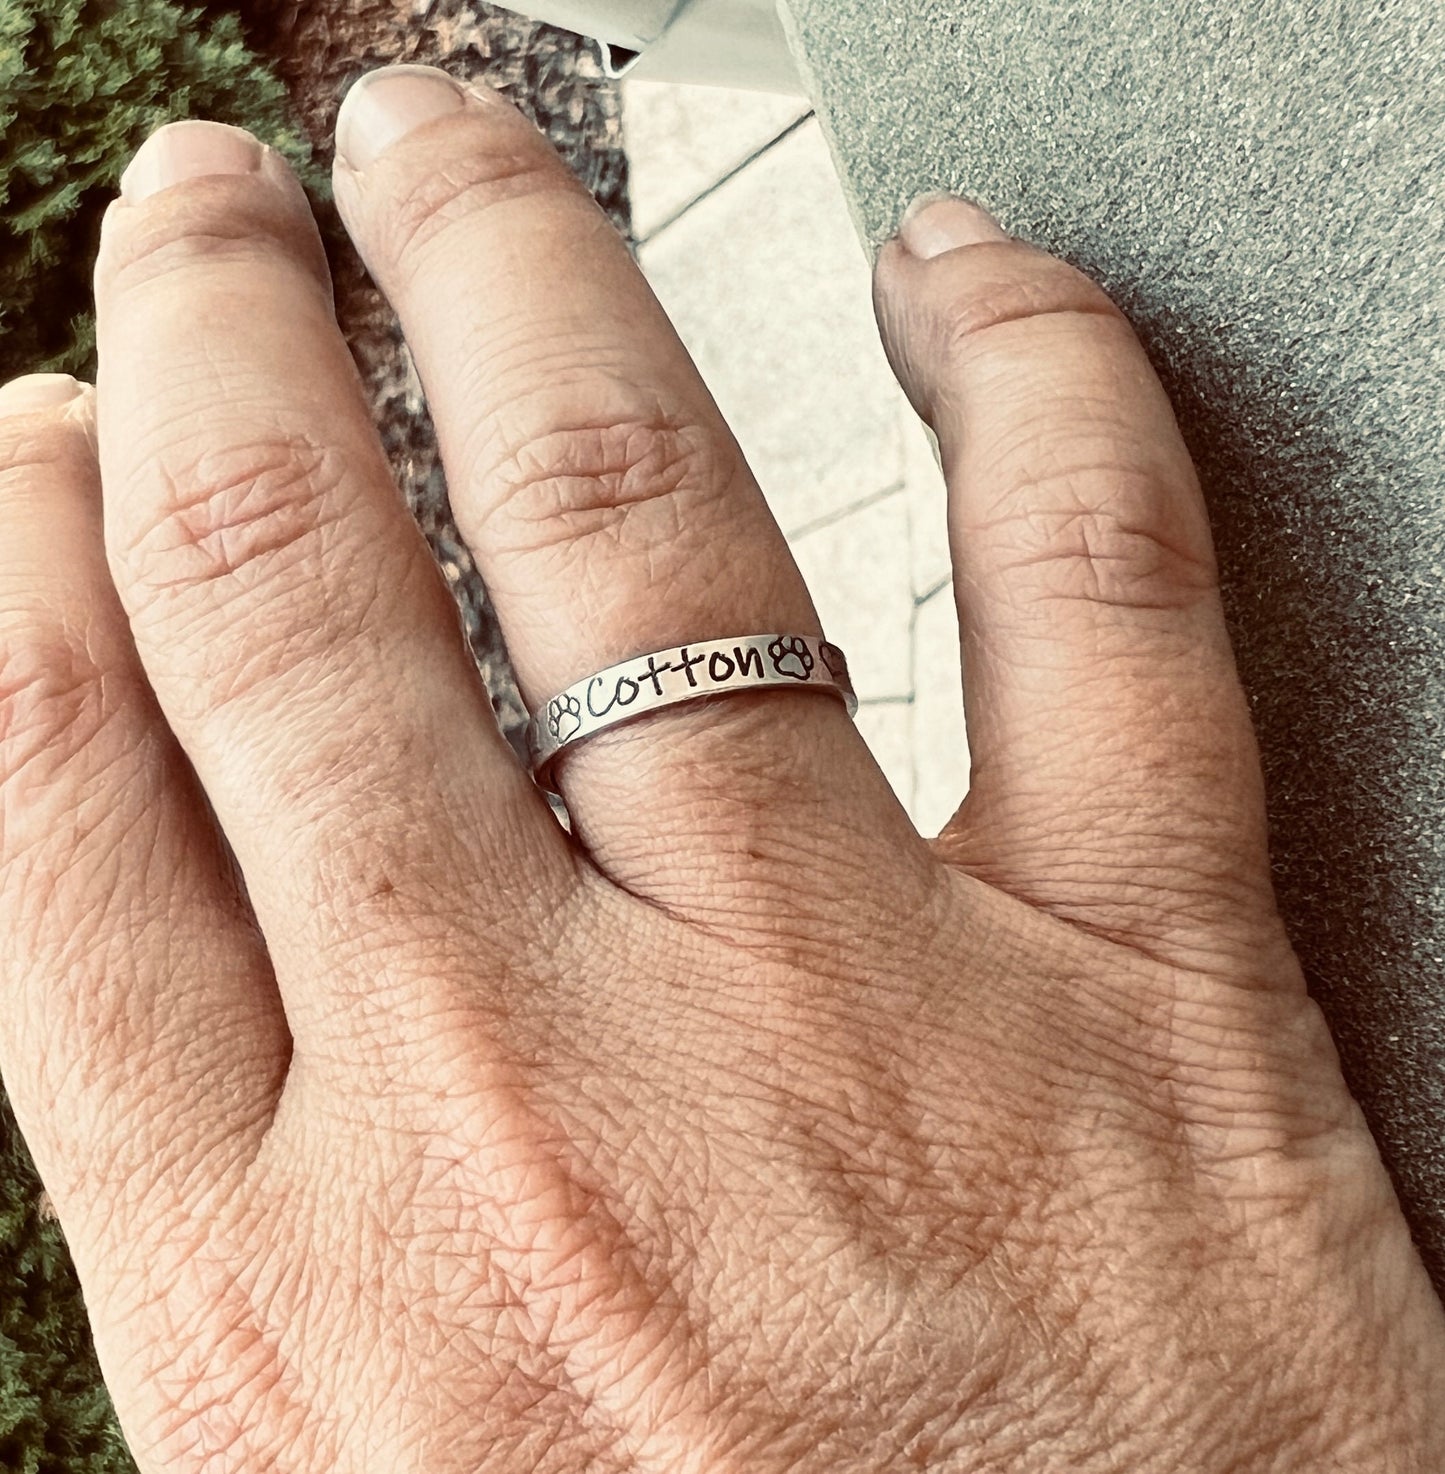 Pet Name Ring in Solid Sterling Silver Ring